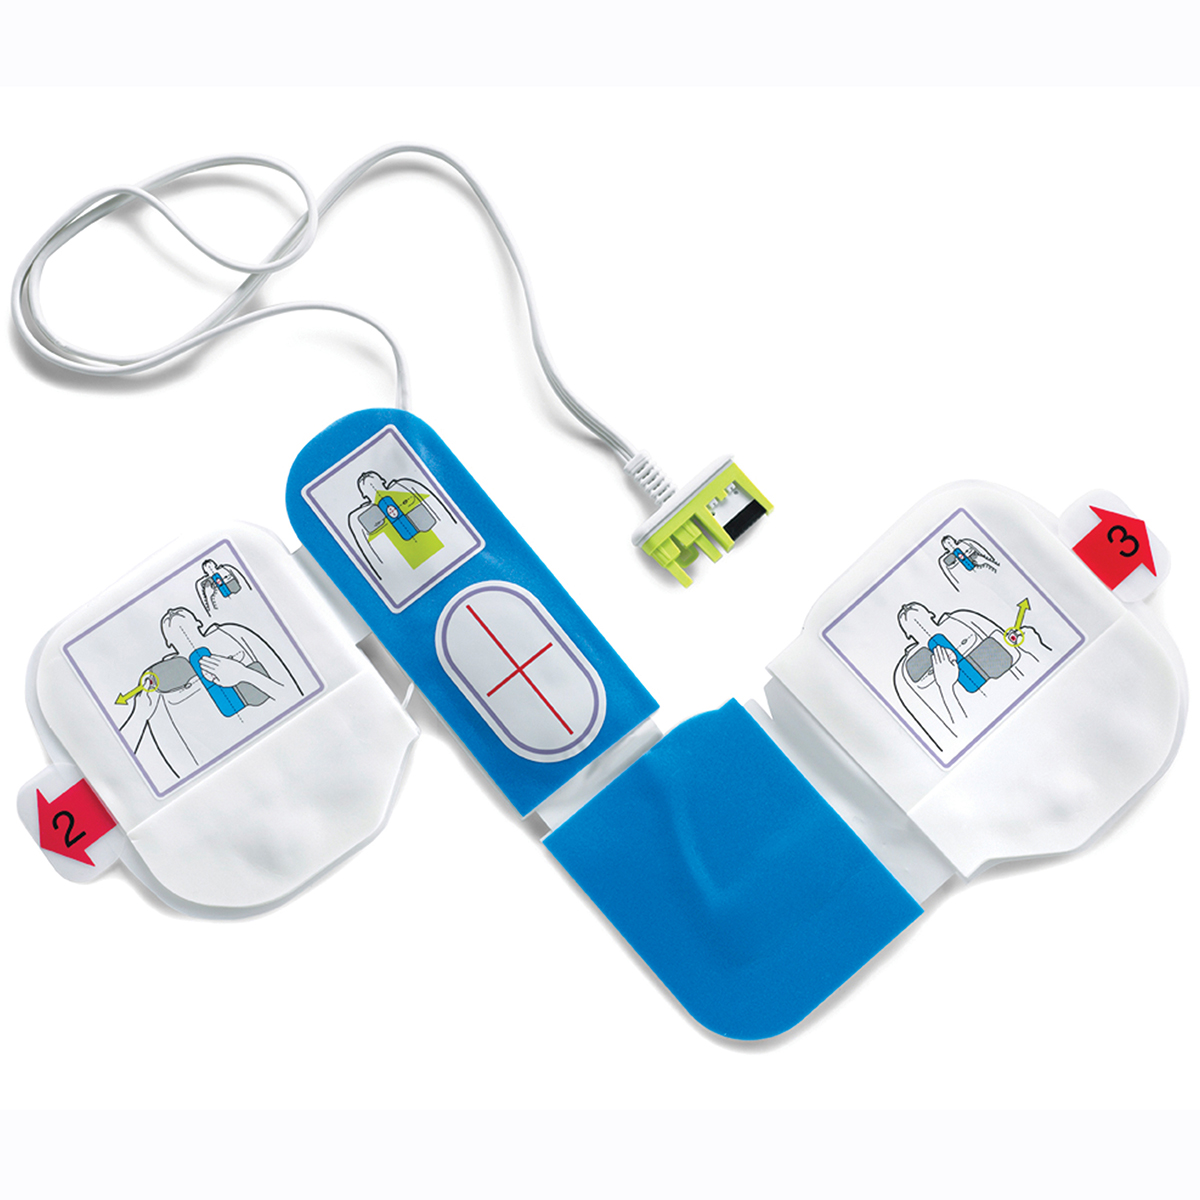 CPR-D-Padz® with First Responder Kit for Zoll® Defibrillators